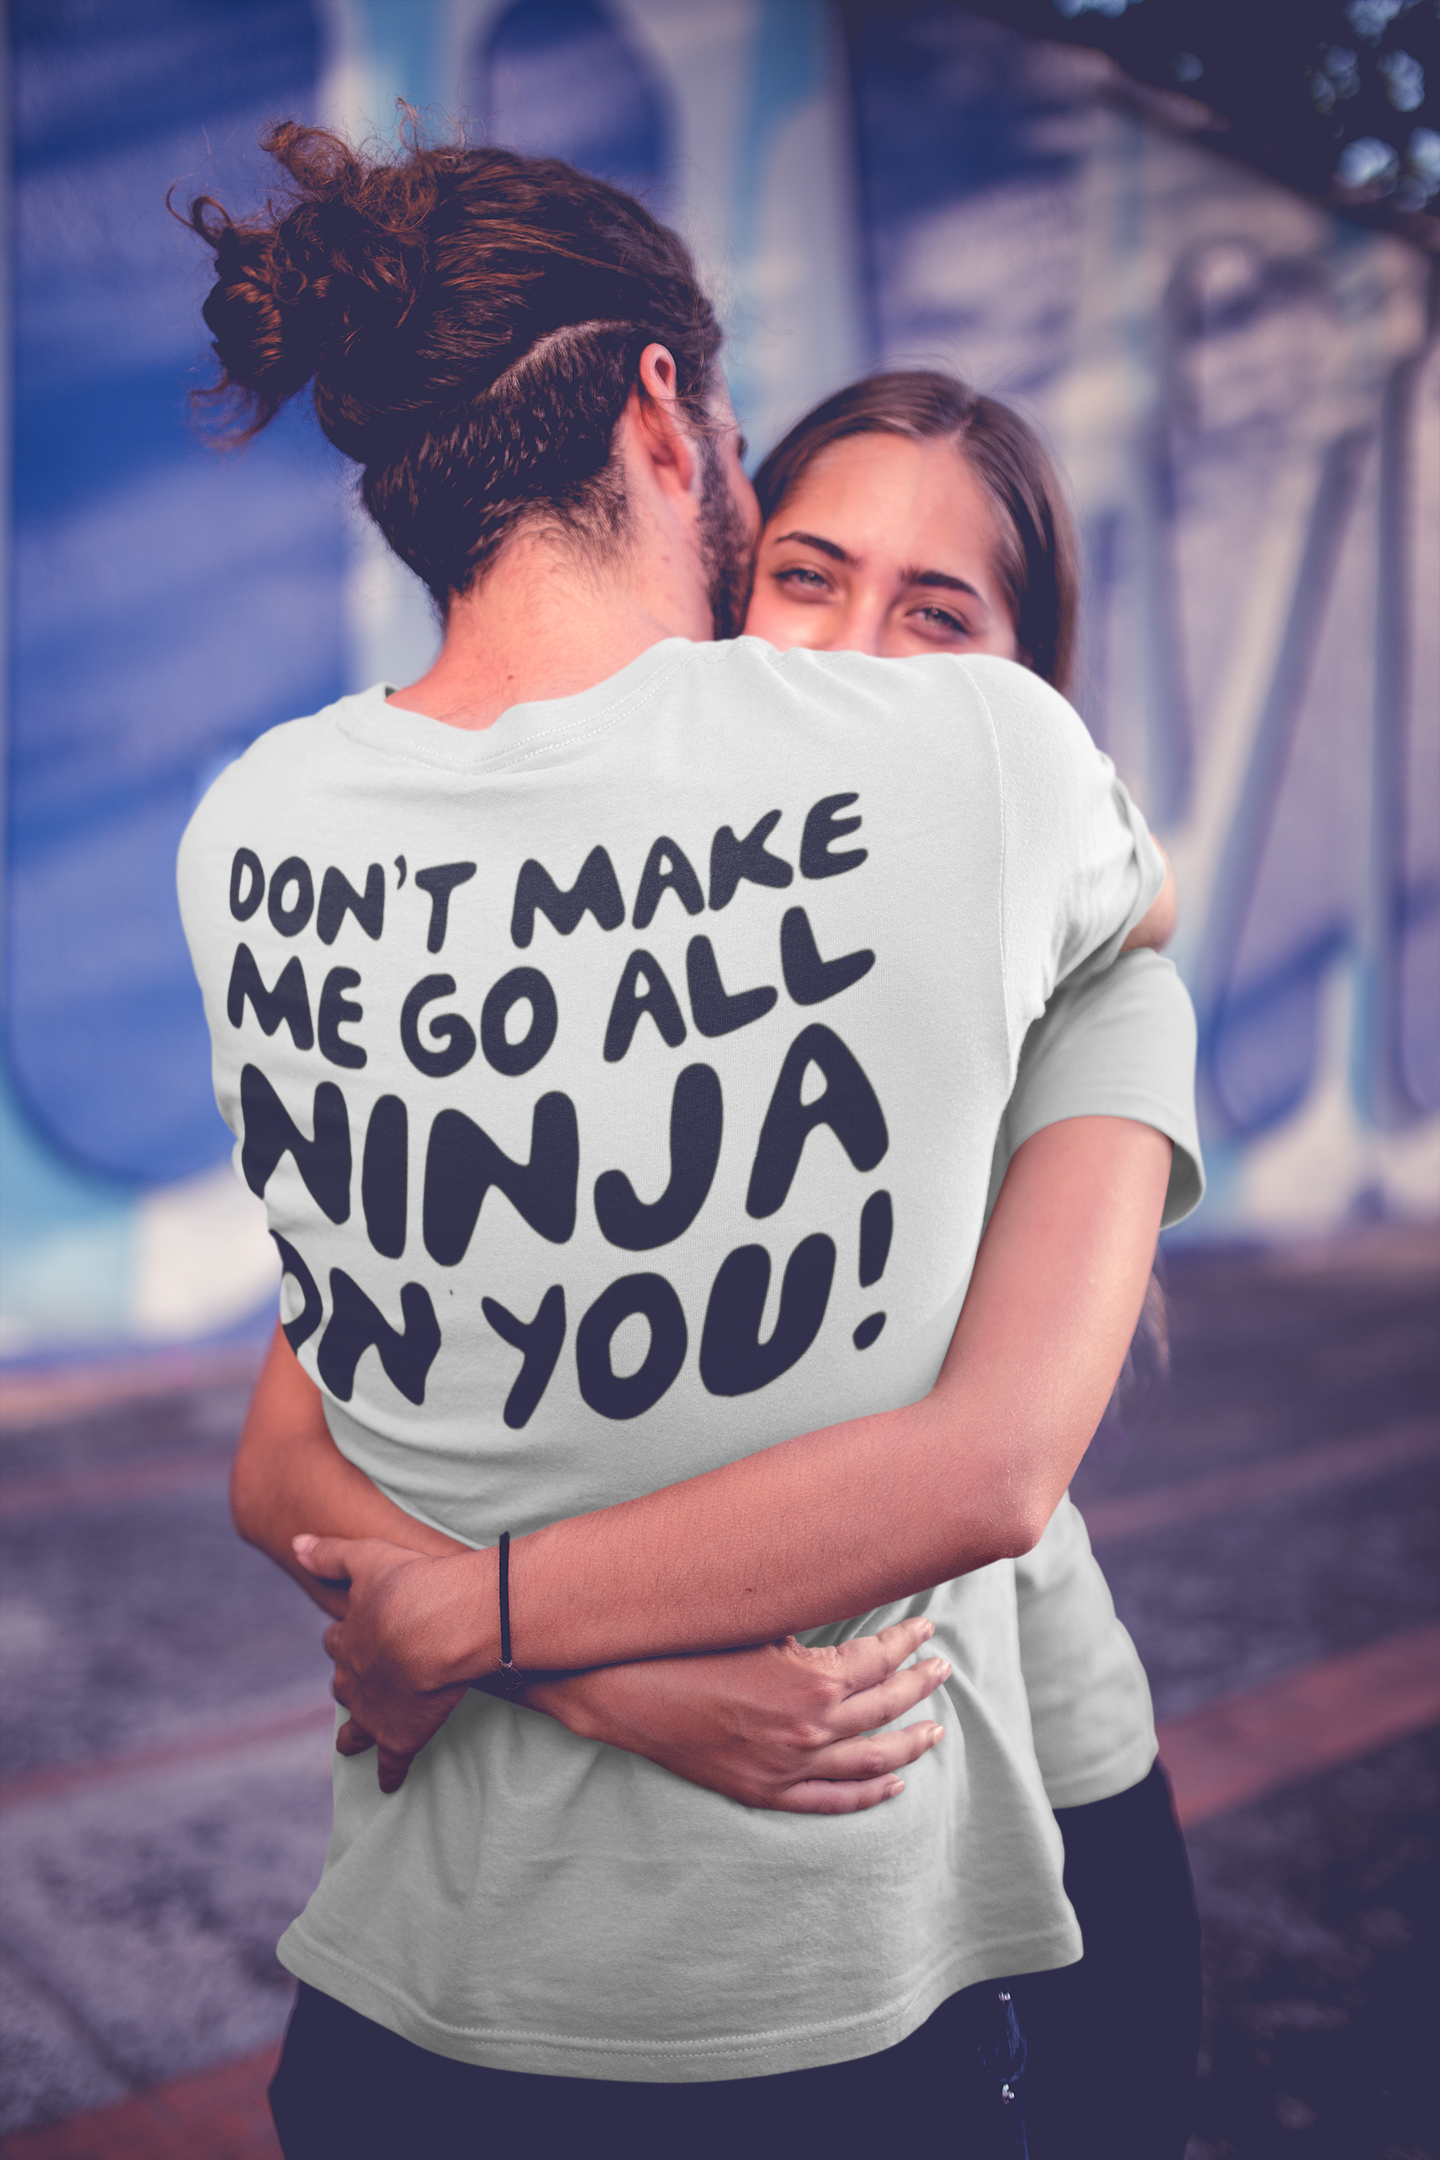 long-haired-man-wearing-a-t-shirt-mockup-hugging-his-girlfriend-a20581.png